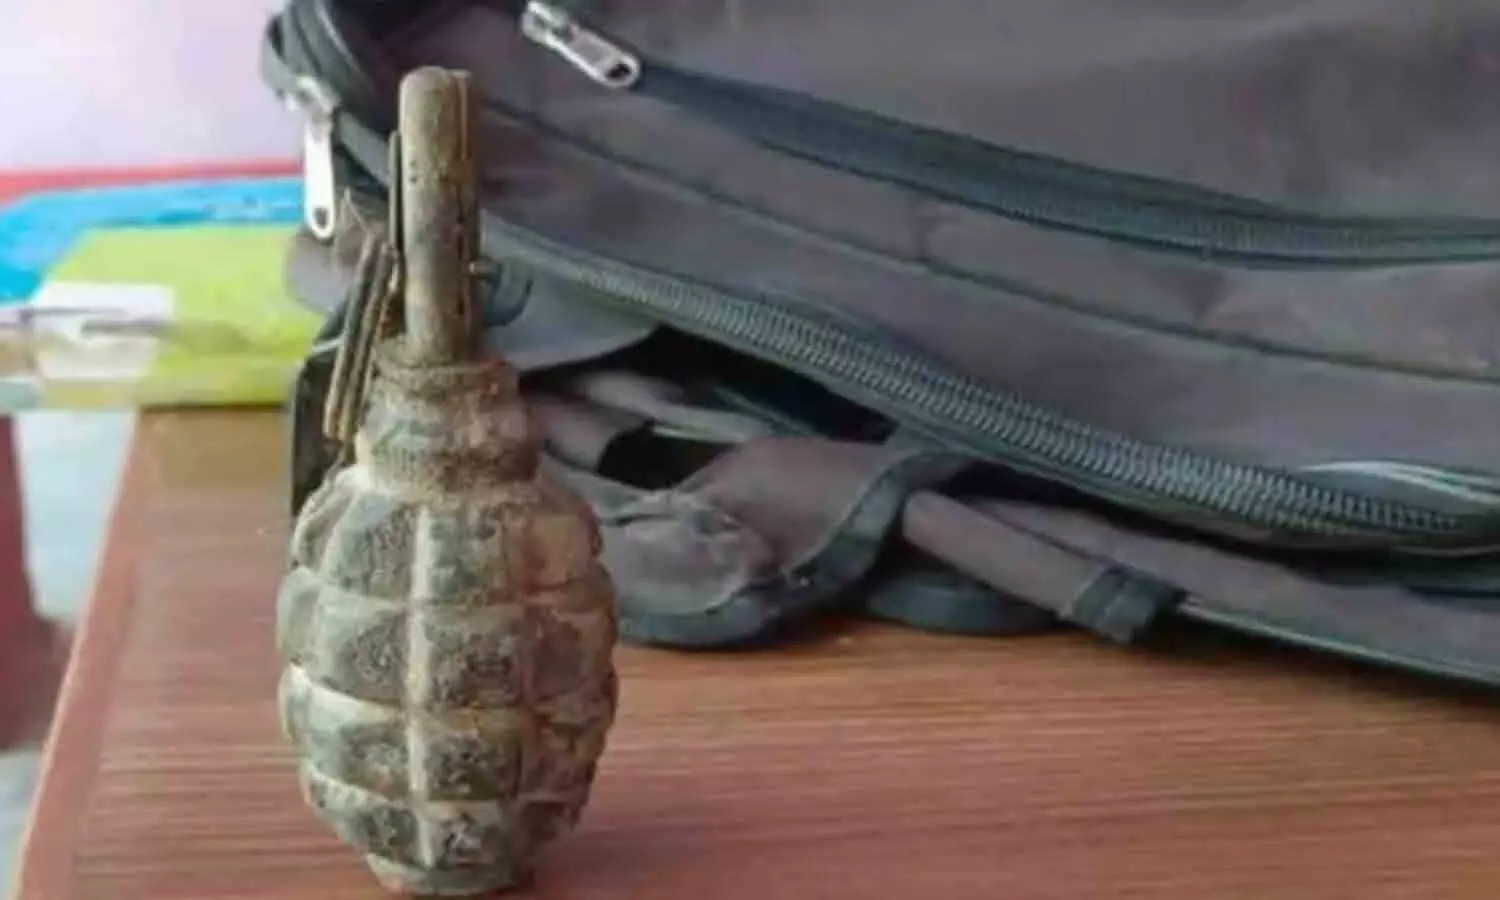 Hand Grenade Found: In Asias largest village, youths got hand grenade while fishing, atmosphere of panic